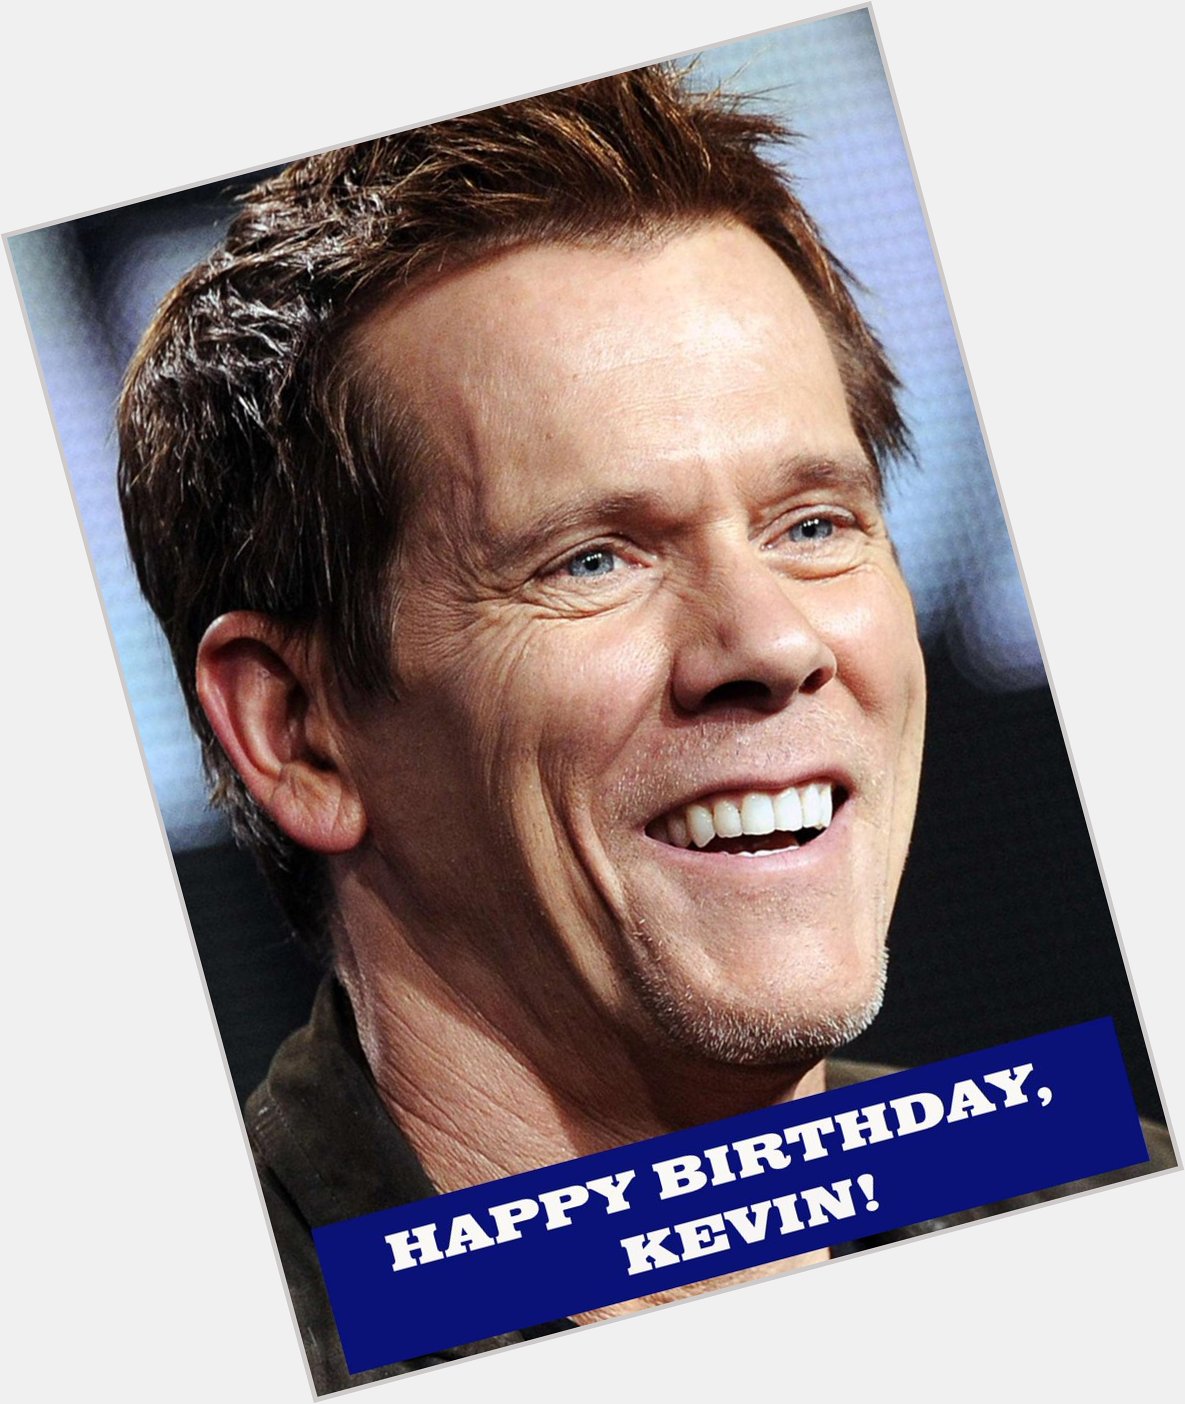 Movie Loft wishing a Happy Birthday to Kevin Bacon, all Six Degrees of him. 